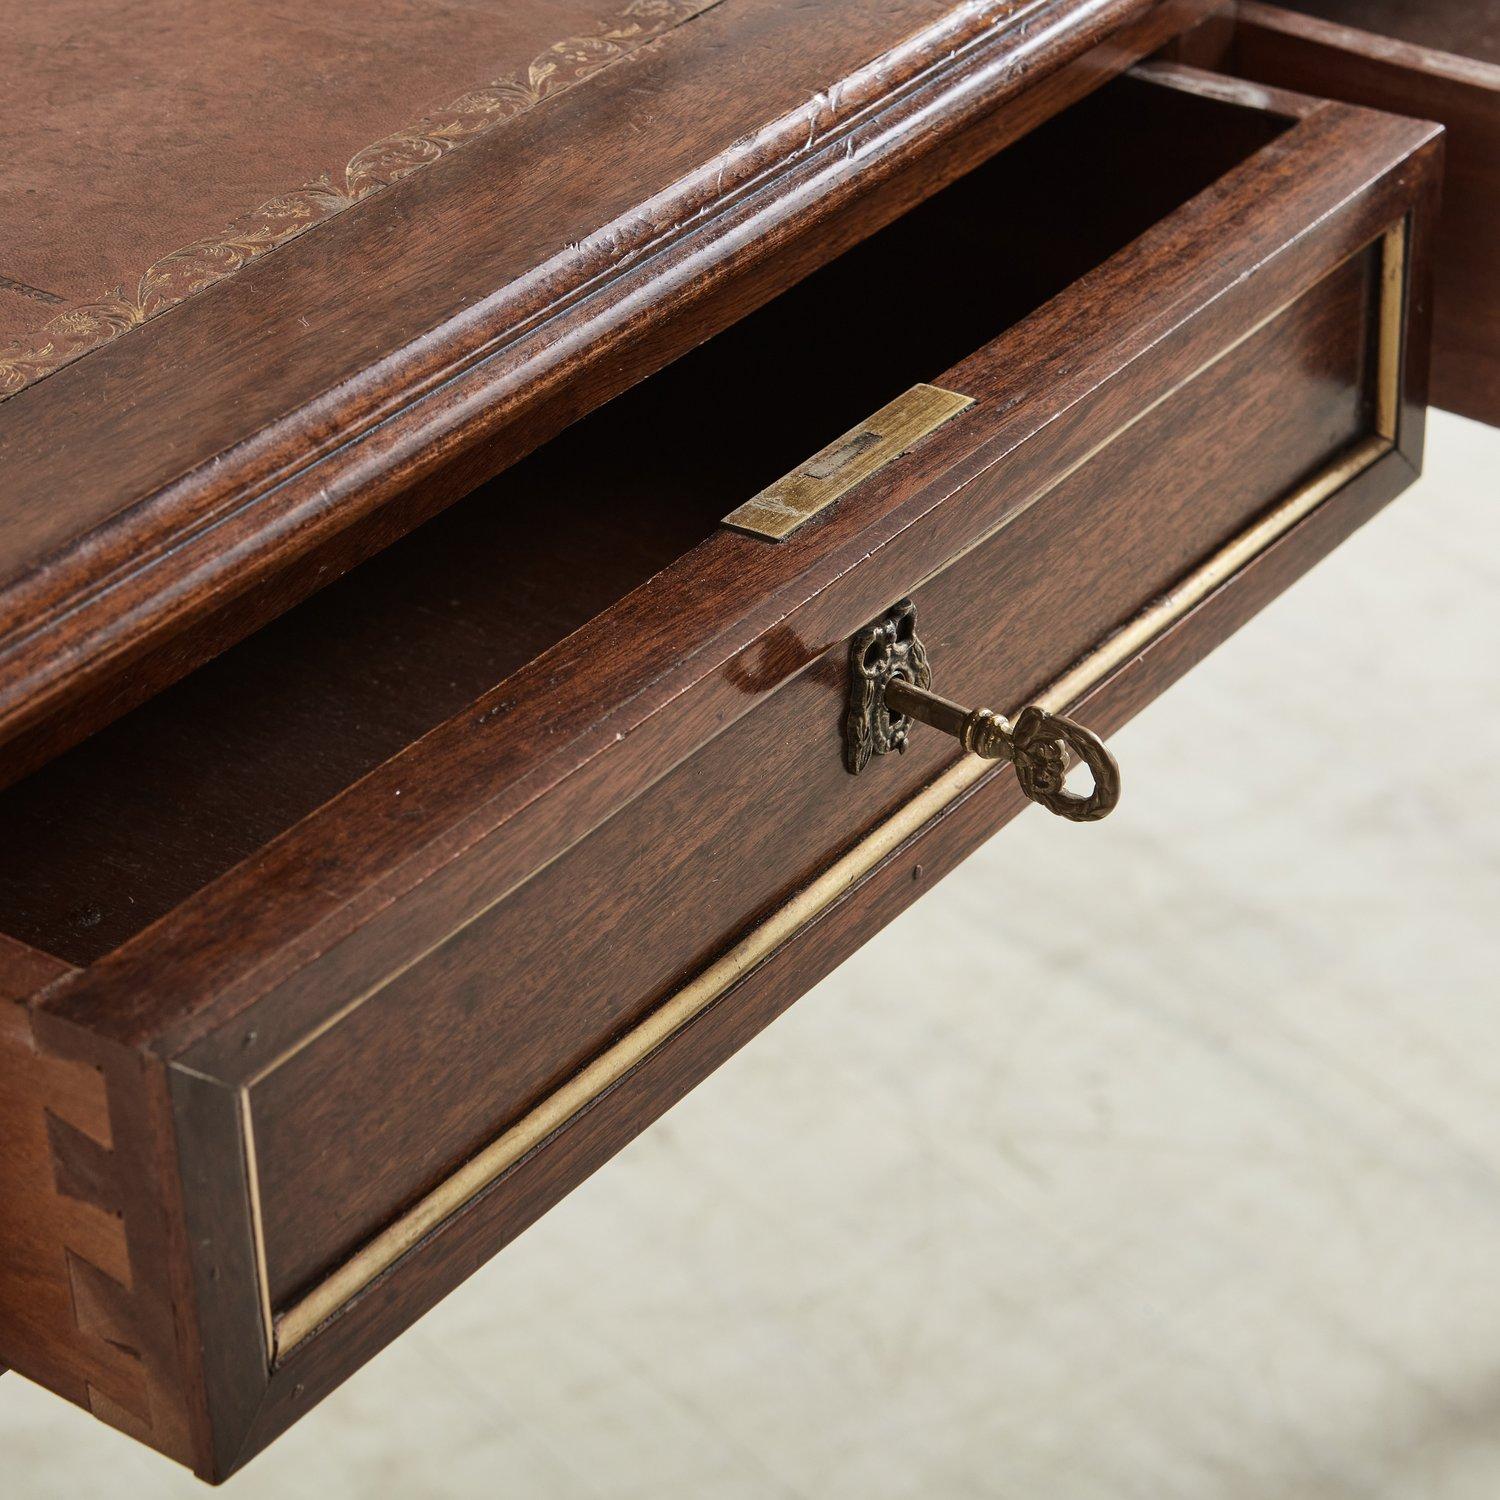 Brass Mahogany Desk With Inlaid Leather Top and Gold Leaf Details, Early 20th Century